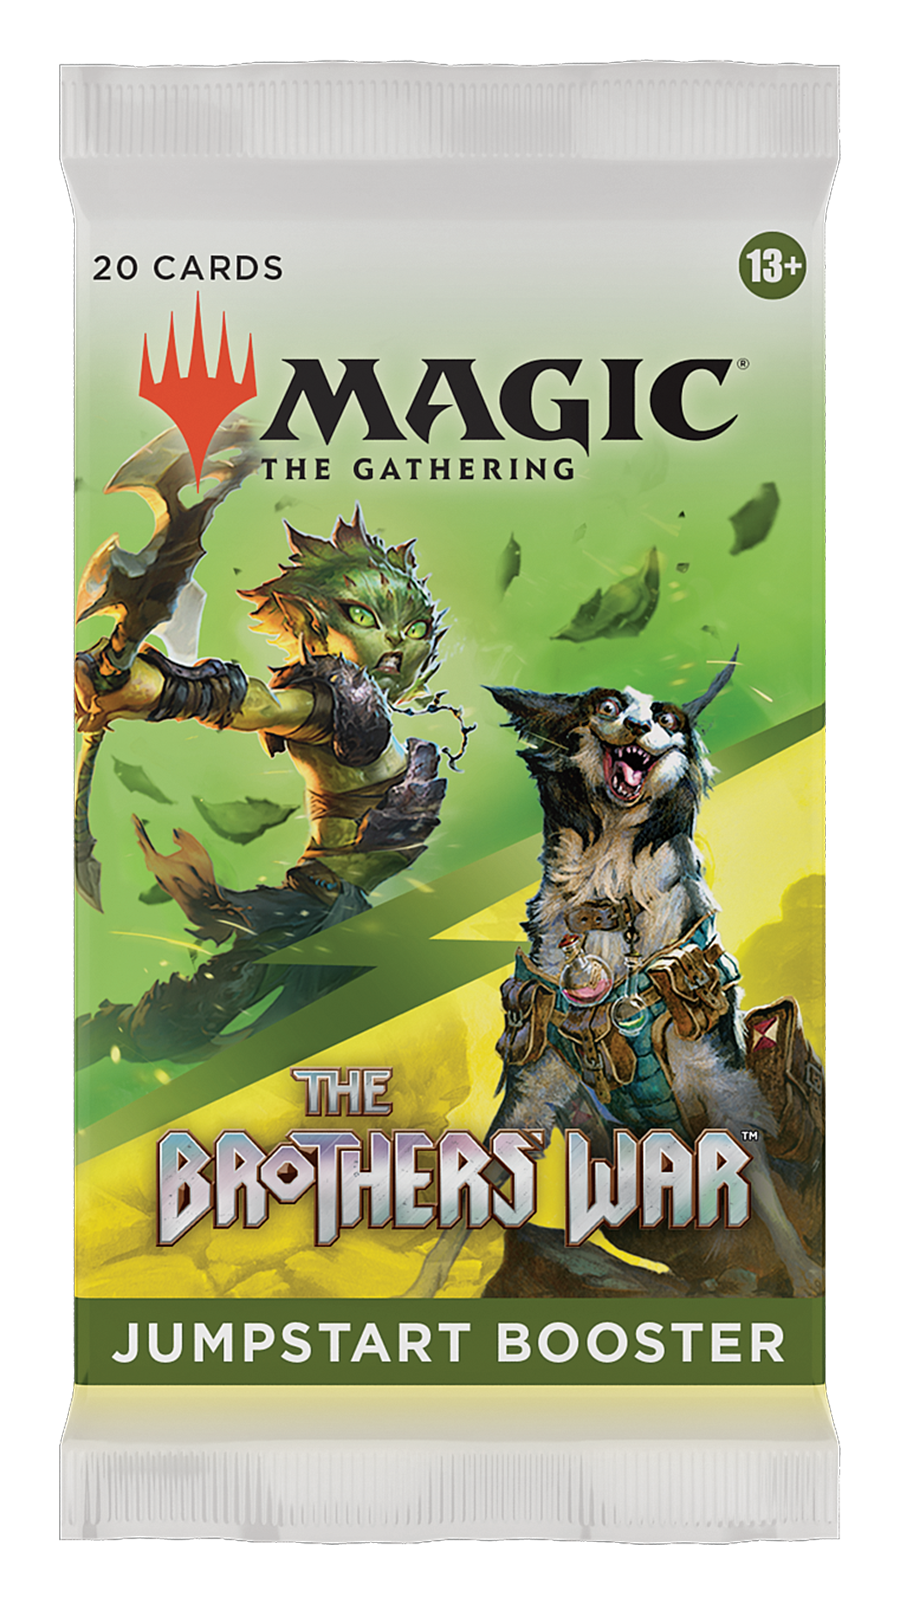 Magic: The Gathering The Brothers’ War Jumpstart Booster | 20 Magic Cards